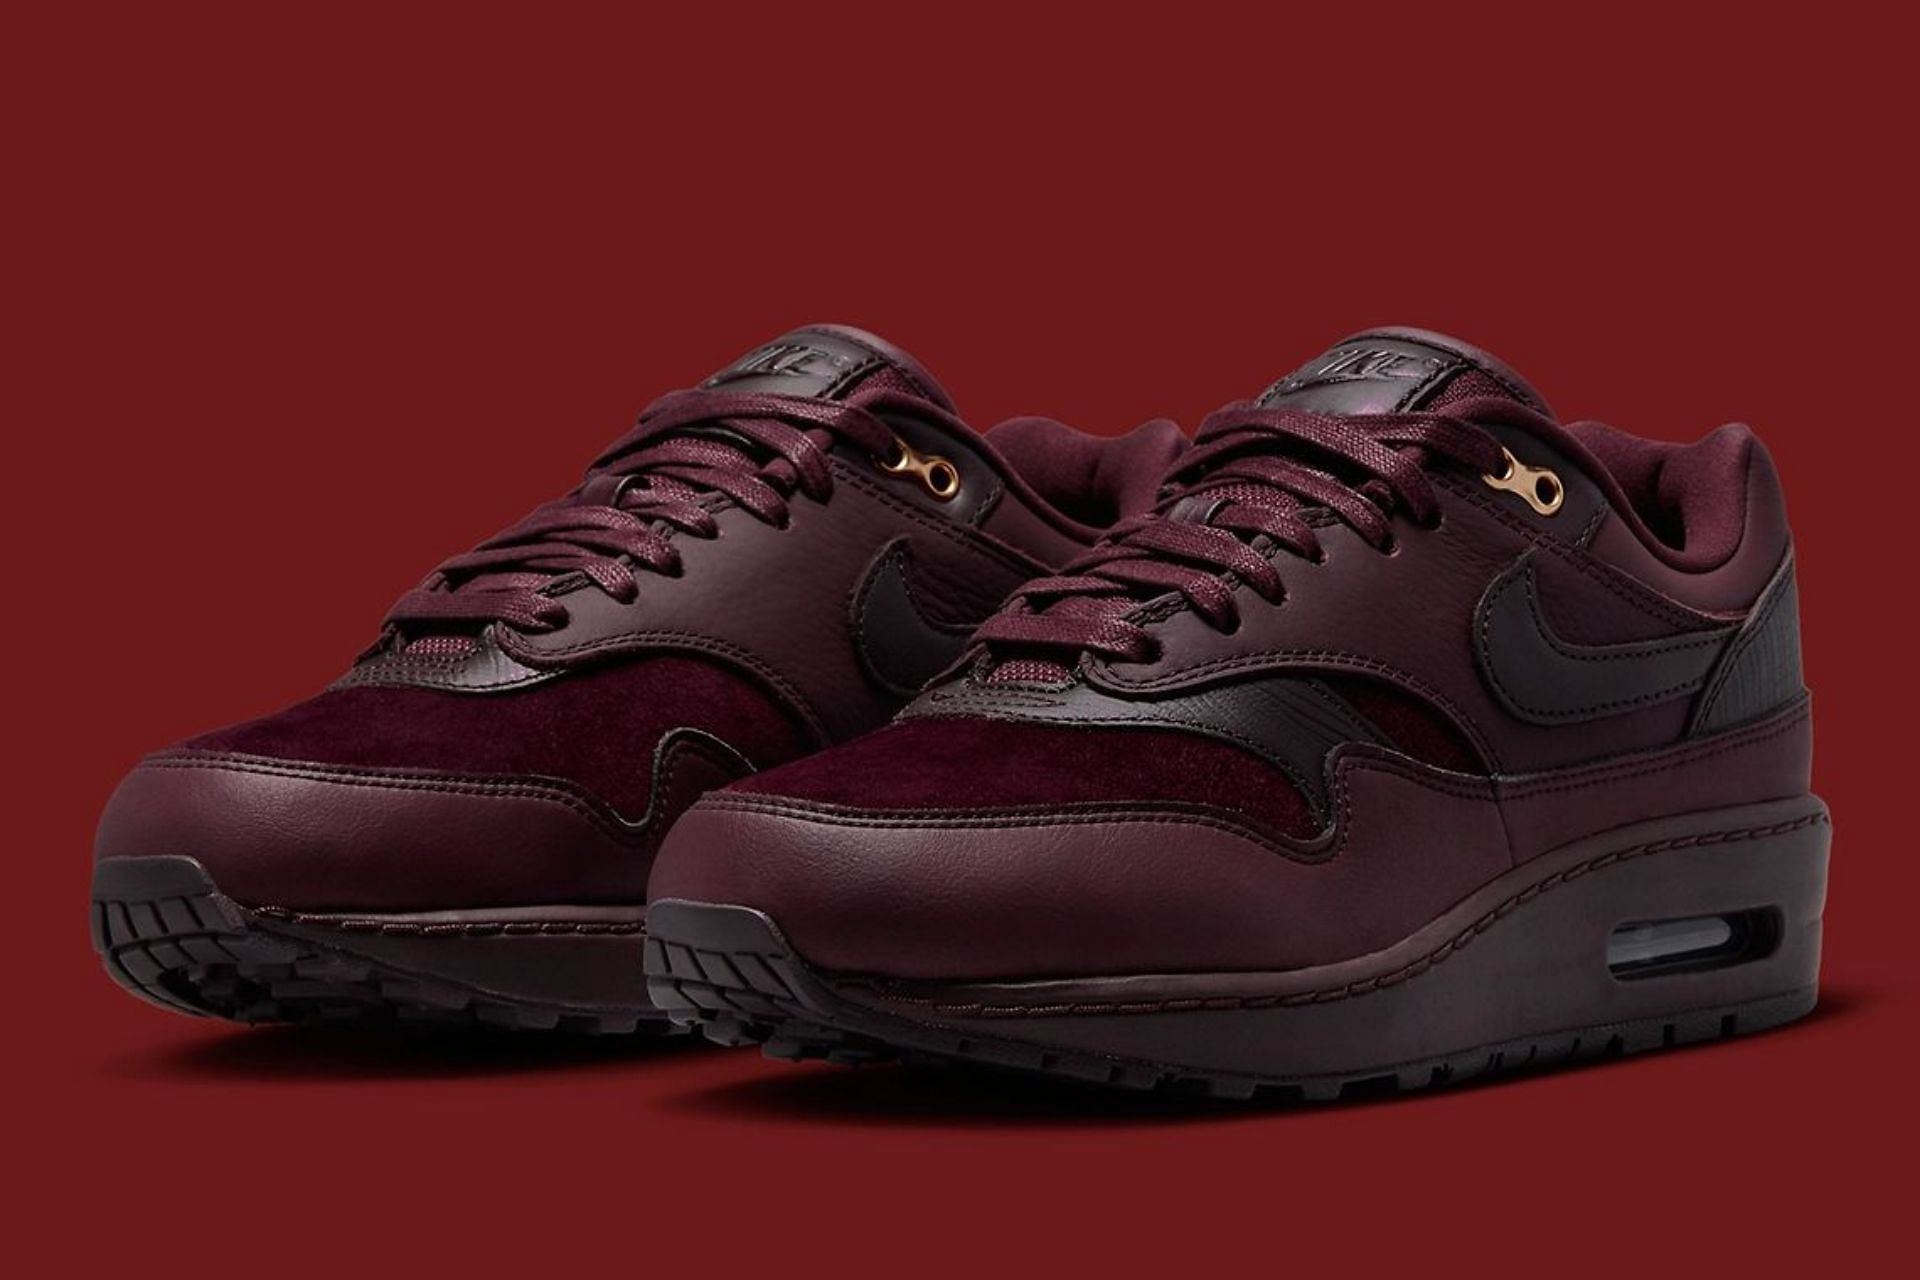 Where to buy Nike Air Max 1 “Burgundy shoes? Price, release date, more details explored